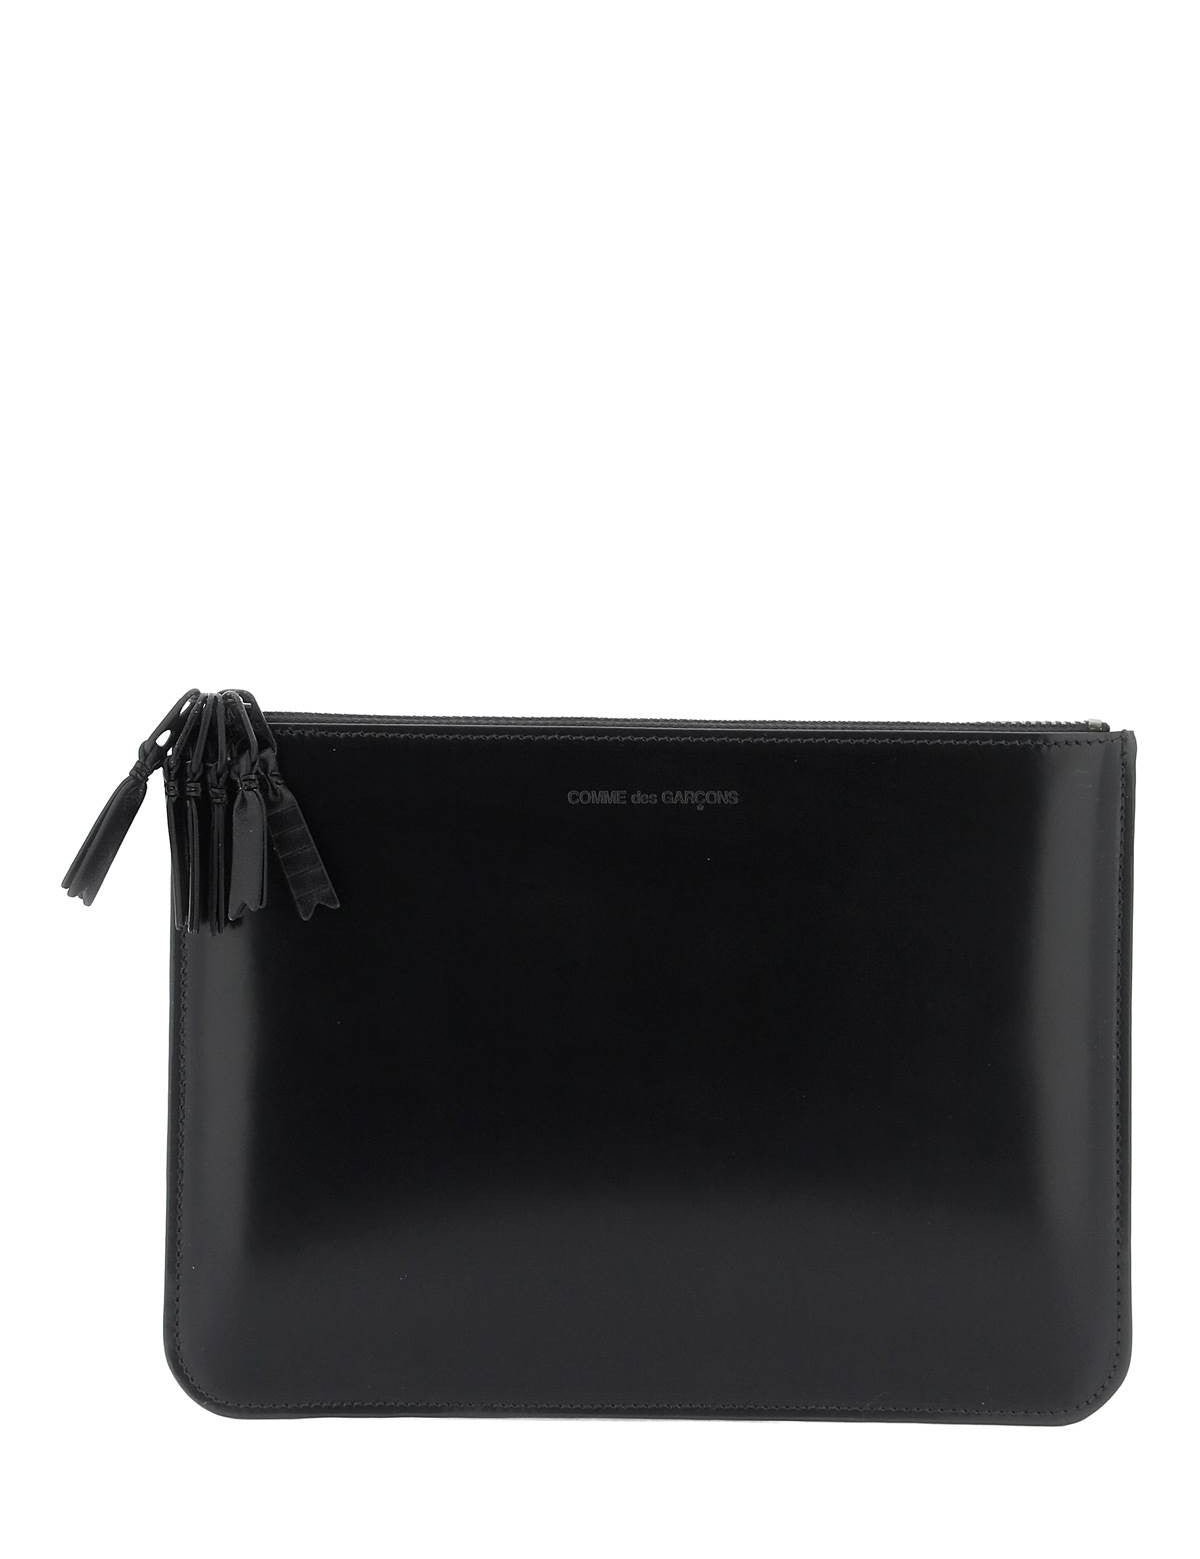 comme-des-garcons-wallet-brushed-leather-multi-zip-pouch-with.jpg